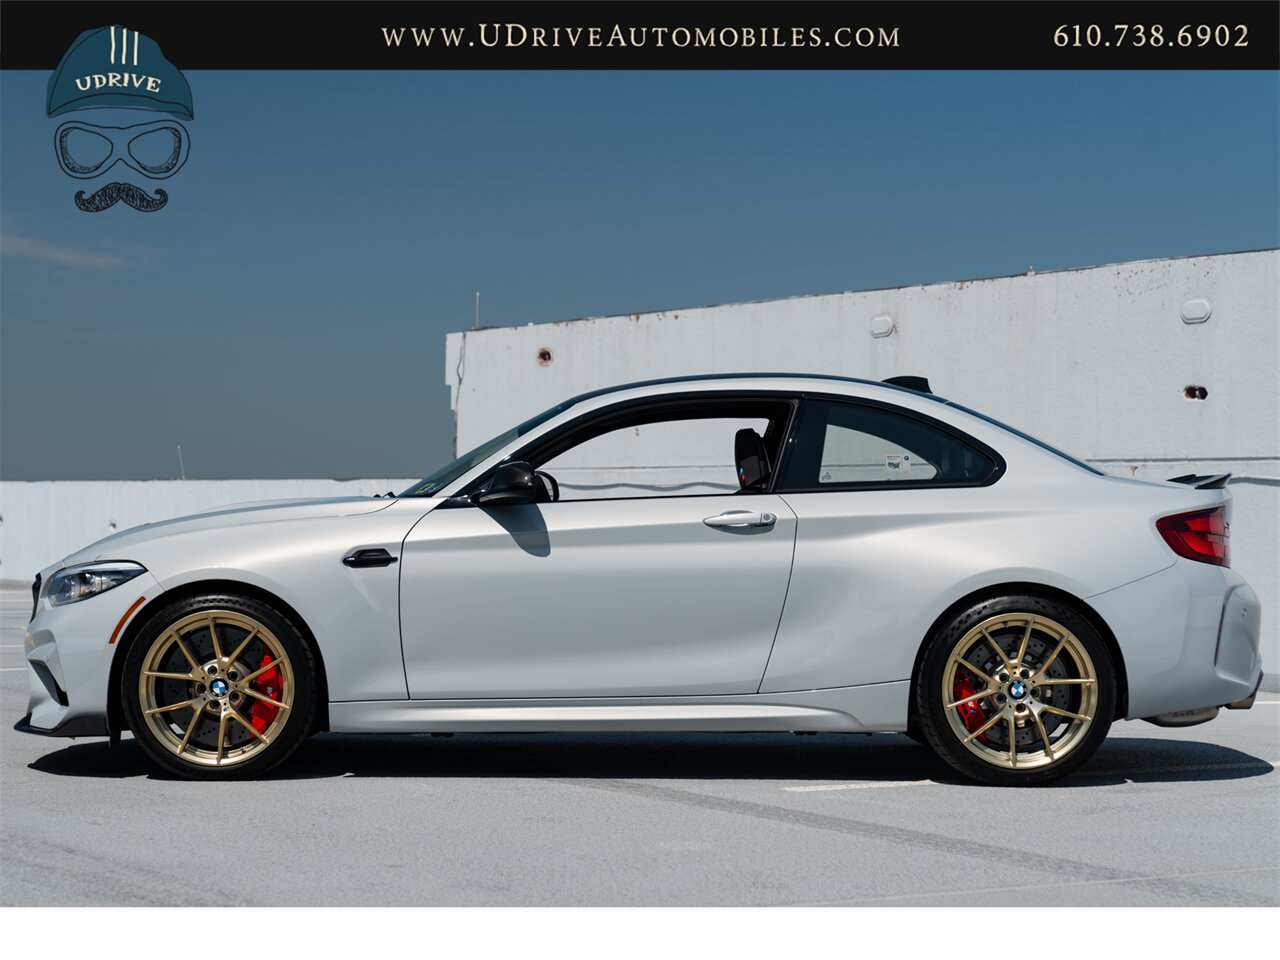 2020 BMW M2 CS  M2 CS 6 Speed Manual 2k Miles Full Body PPF Factory Warranty until 2025 - Photo 8 - West Chester, PA 19382